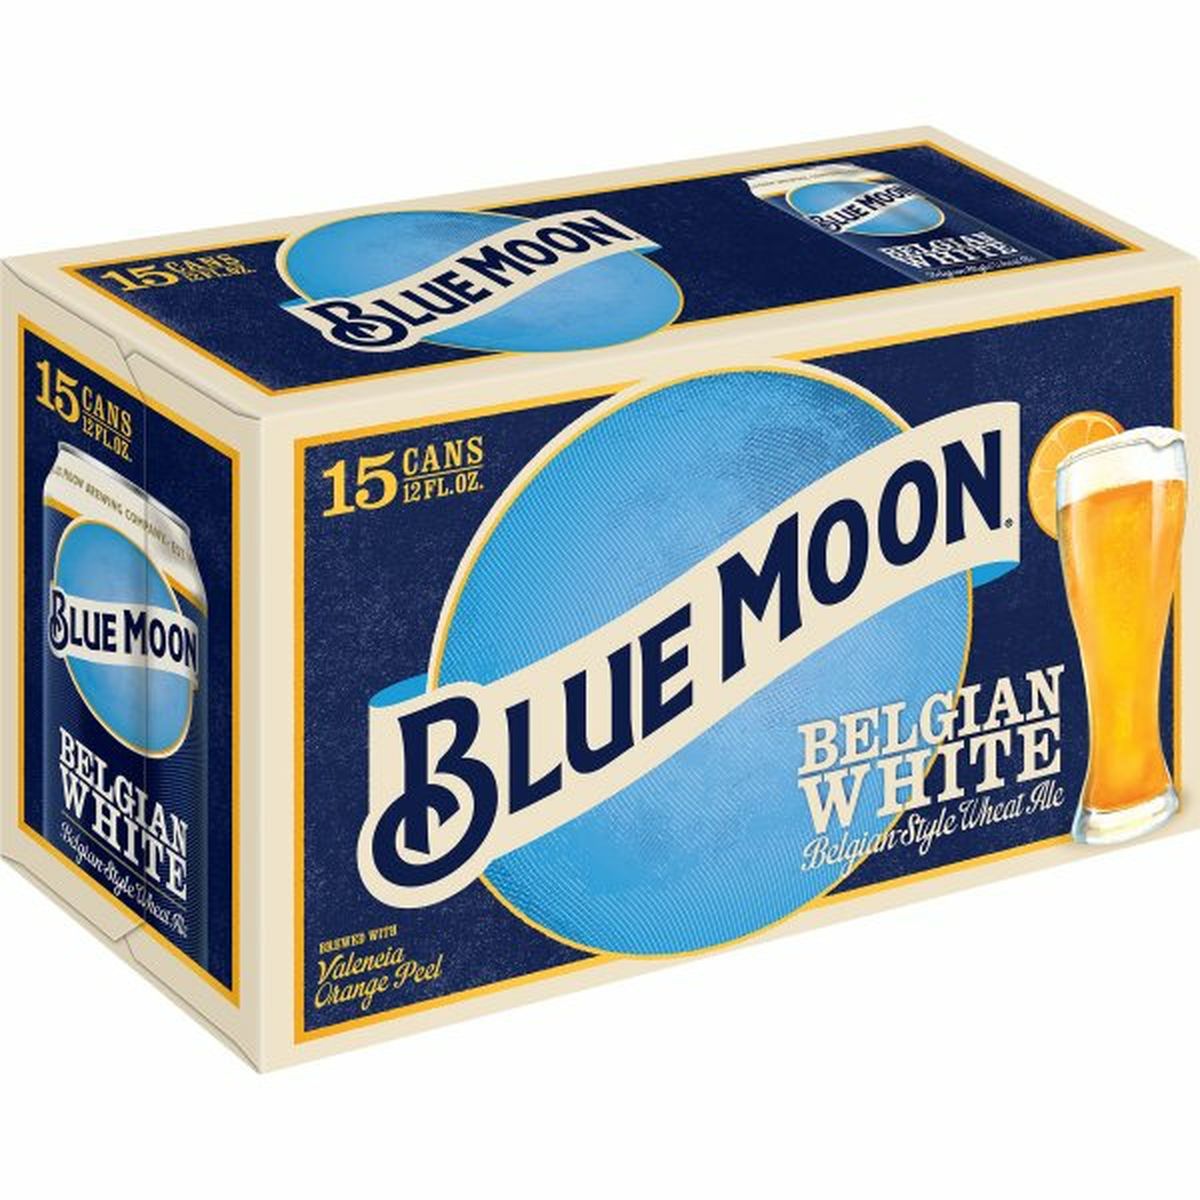 Calories in Blue Moon Belgian White Wheat Ale 15/12 oz cans